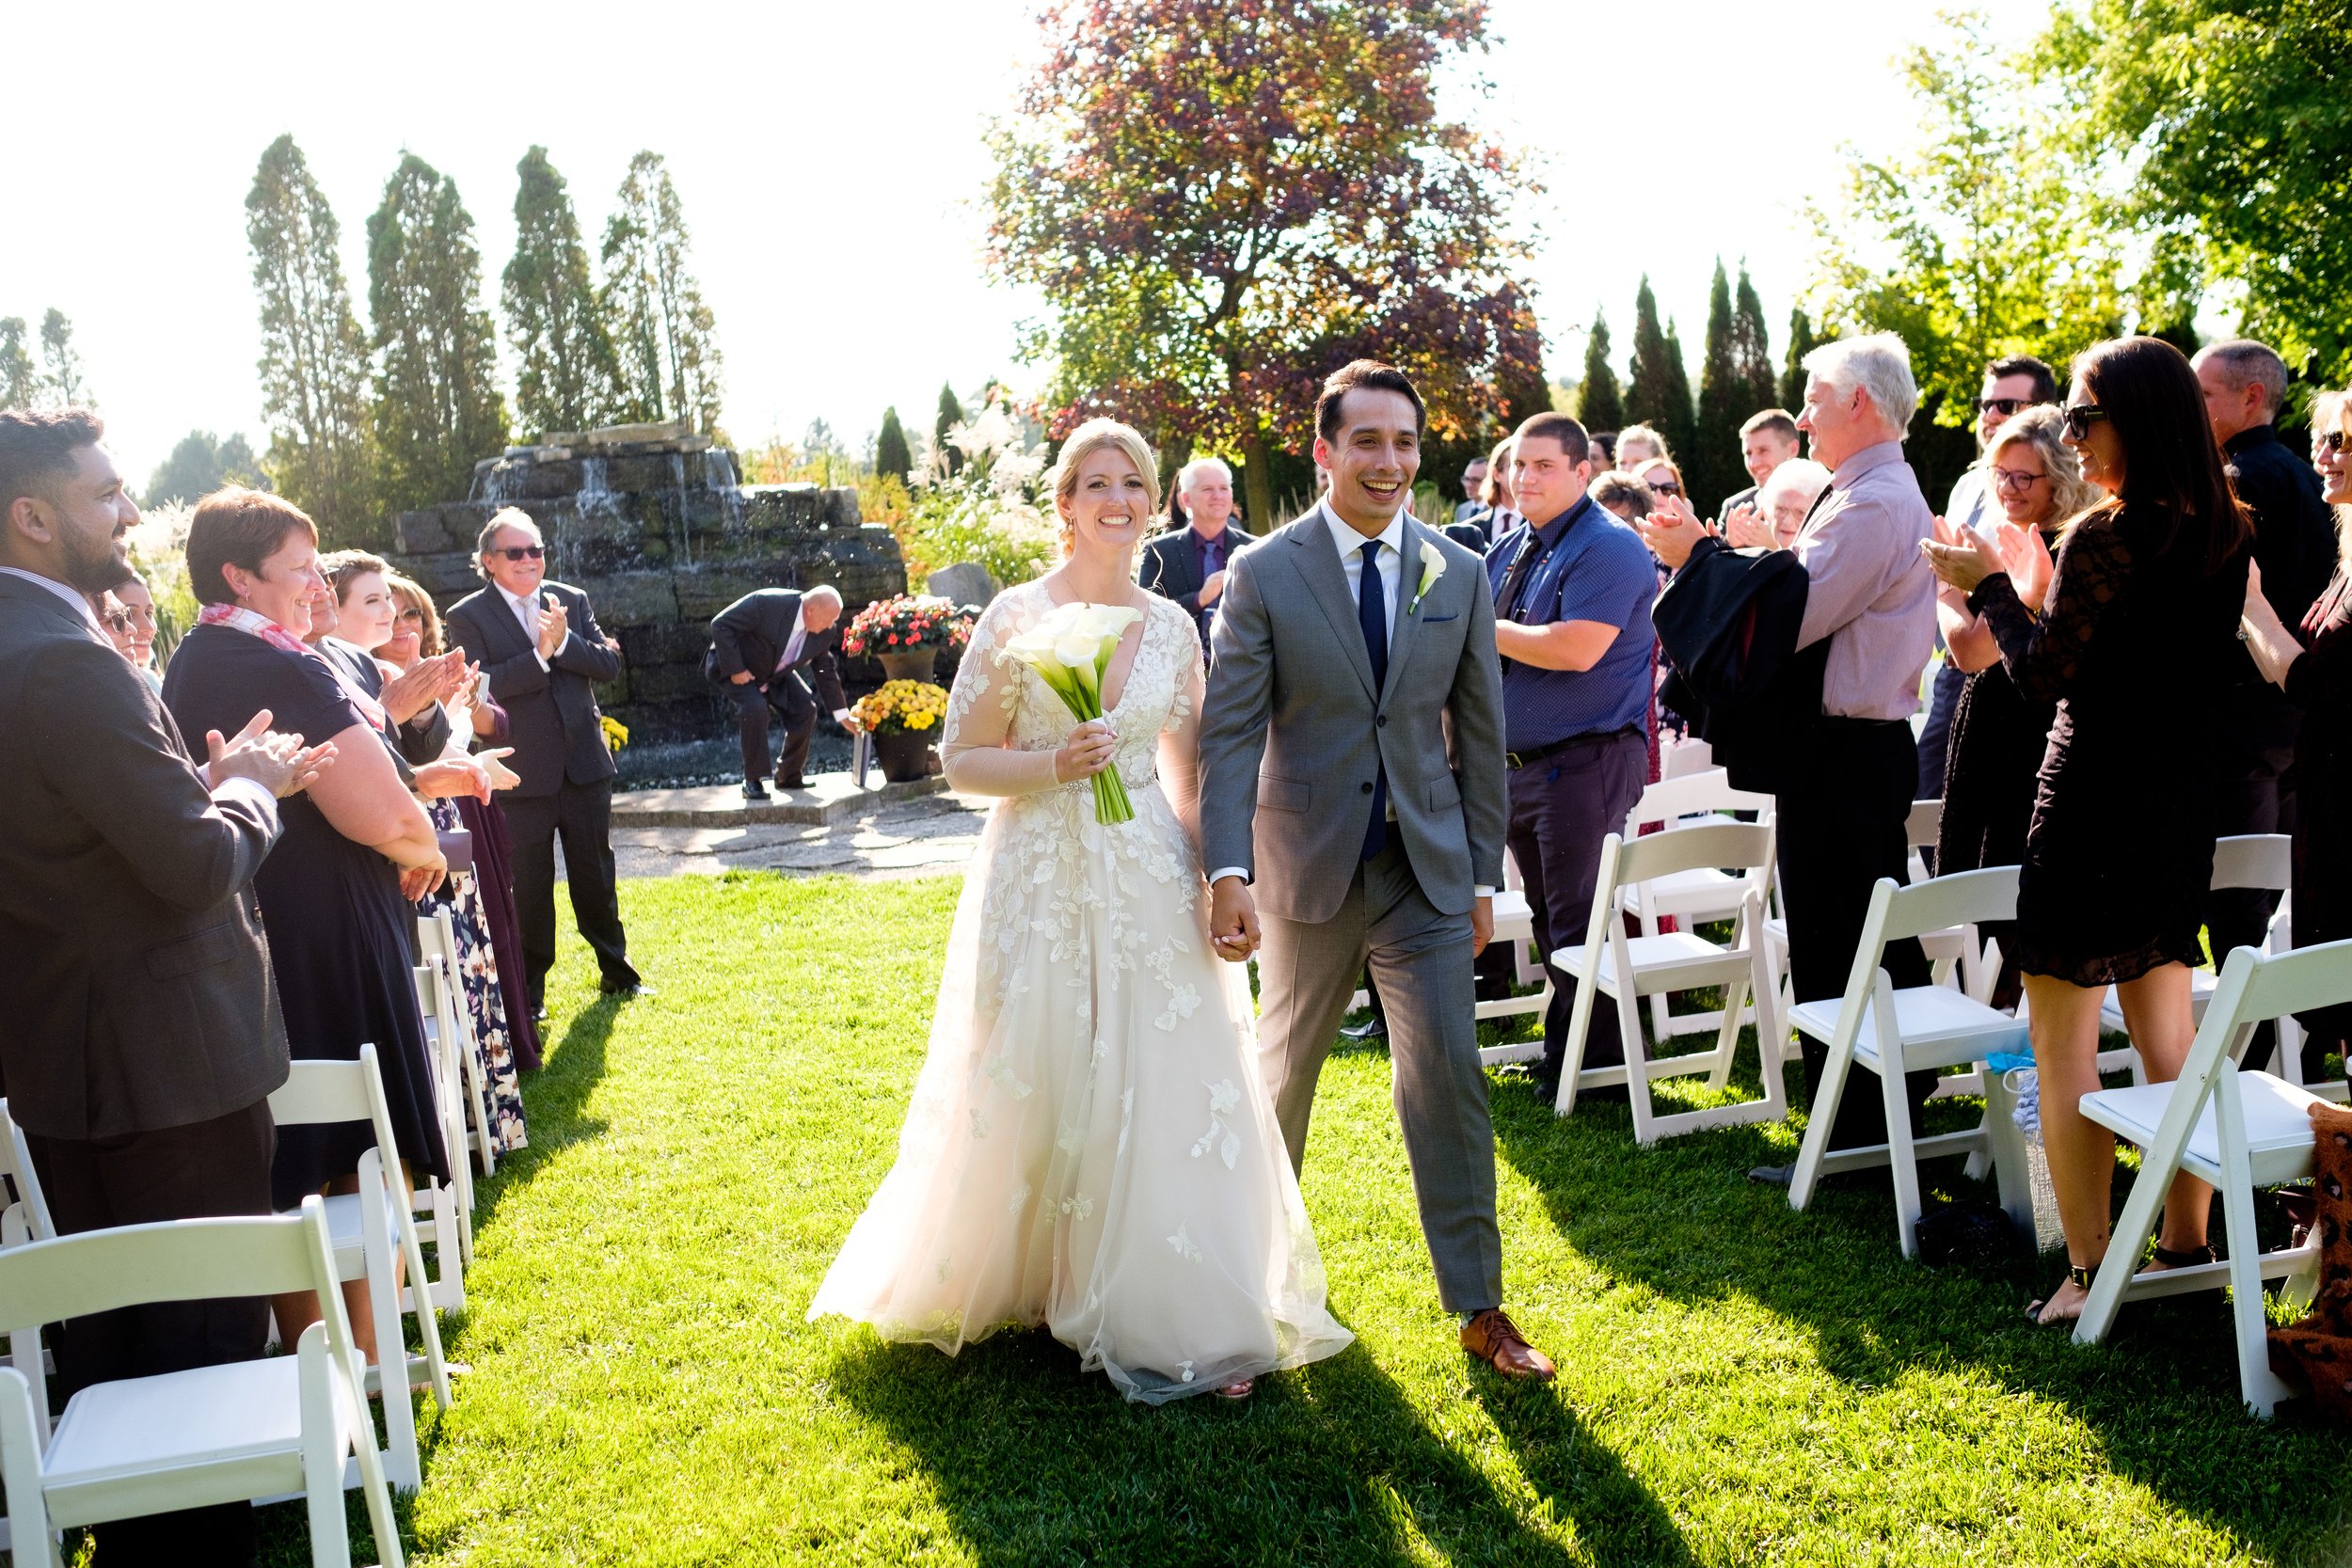  A candid colour wedding photograph after the outdoor wedding ceremony as the happy couple recedes down the aisle of  Cassandra and Antony’s wedding at the Hessenland Inn by Toronto wedding photographer Scott Williams. 